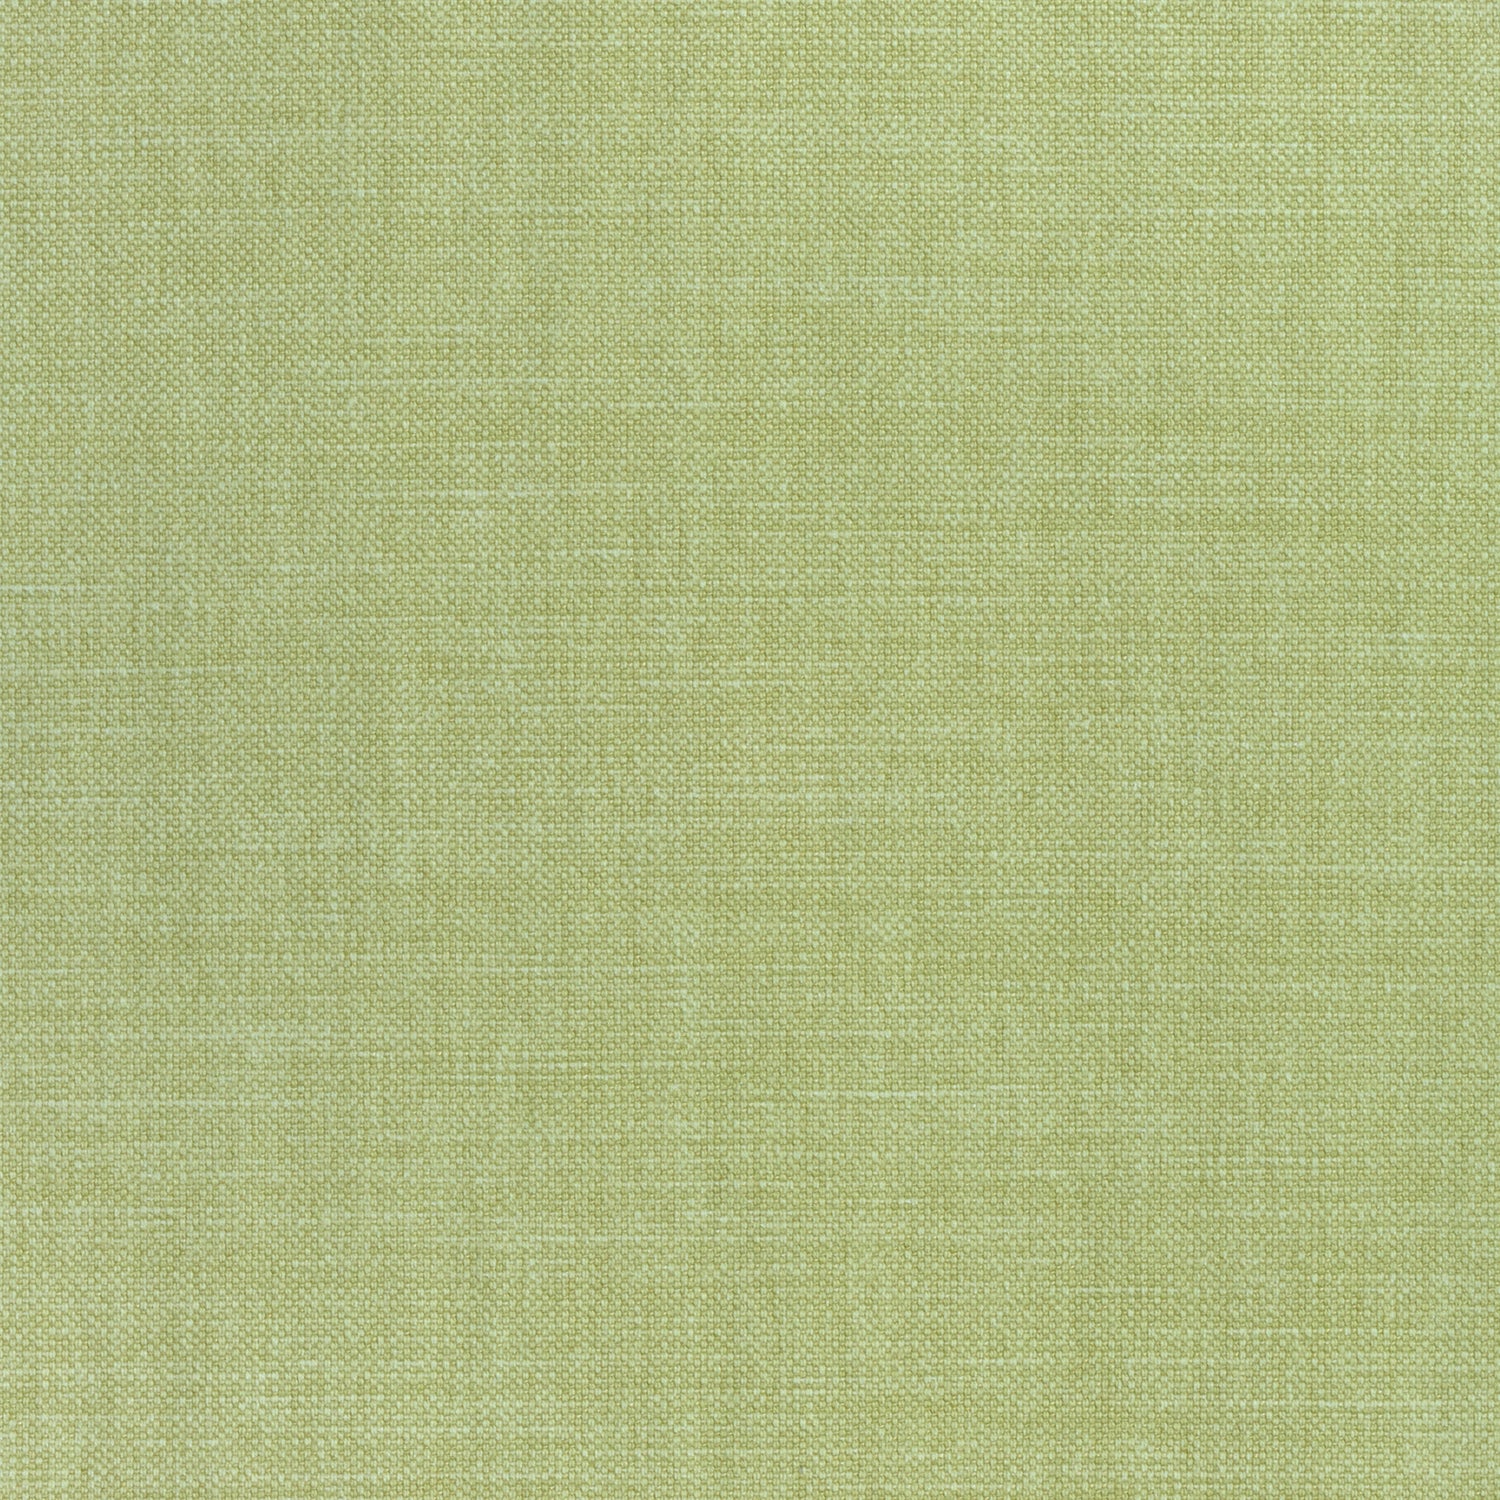 Prisma fabric in lemongrass color - pattern number W70138 - by Thibaut in the Woven Resource Vol 12 Prisma Fabrics collection